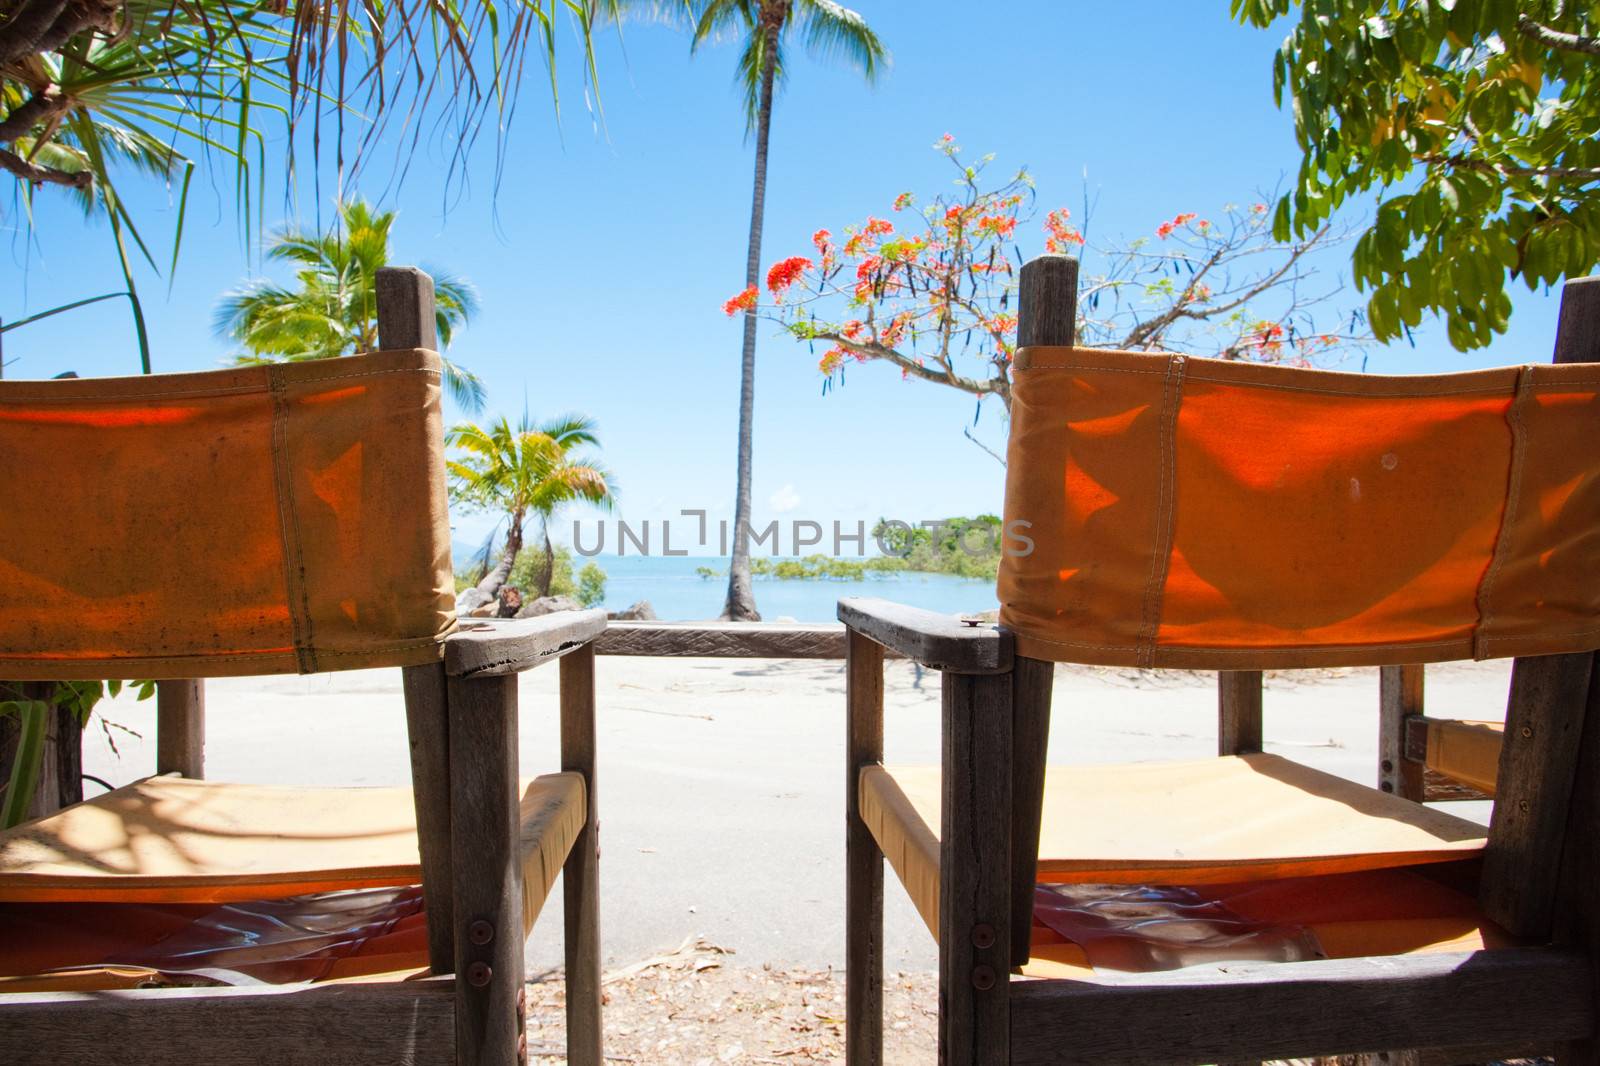 Two deck chairs overlooking a tropical beach by jrstock